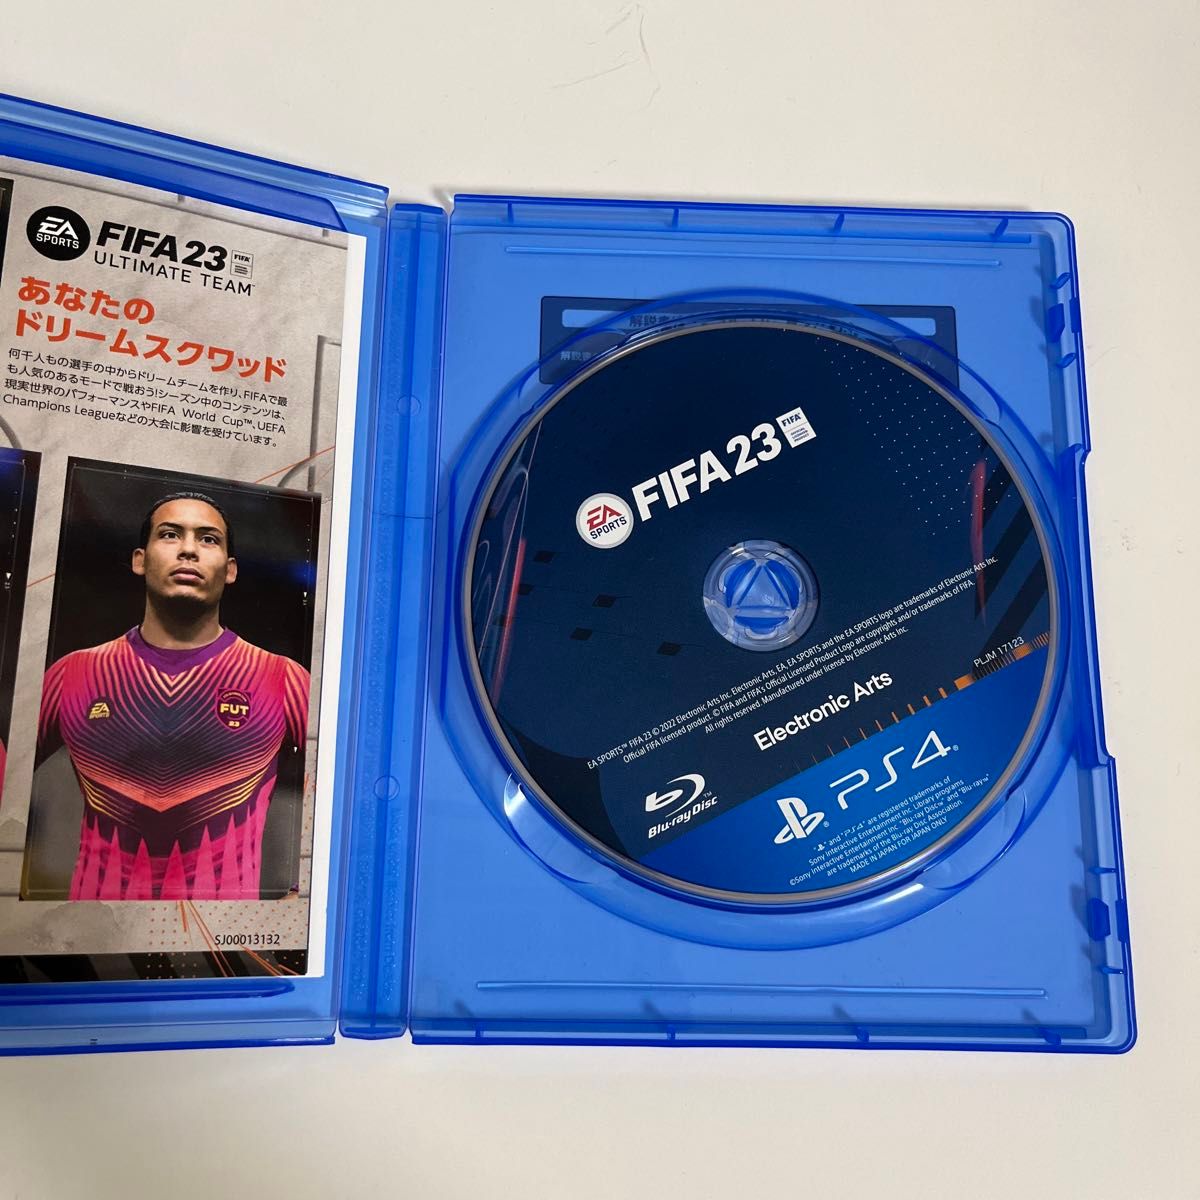 FIFA23 ゲームソフト PS4ソフト サッカー Station Play